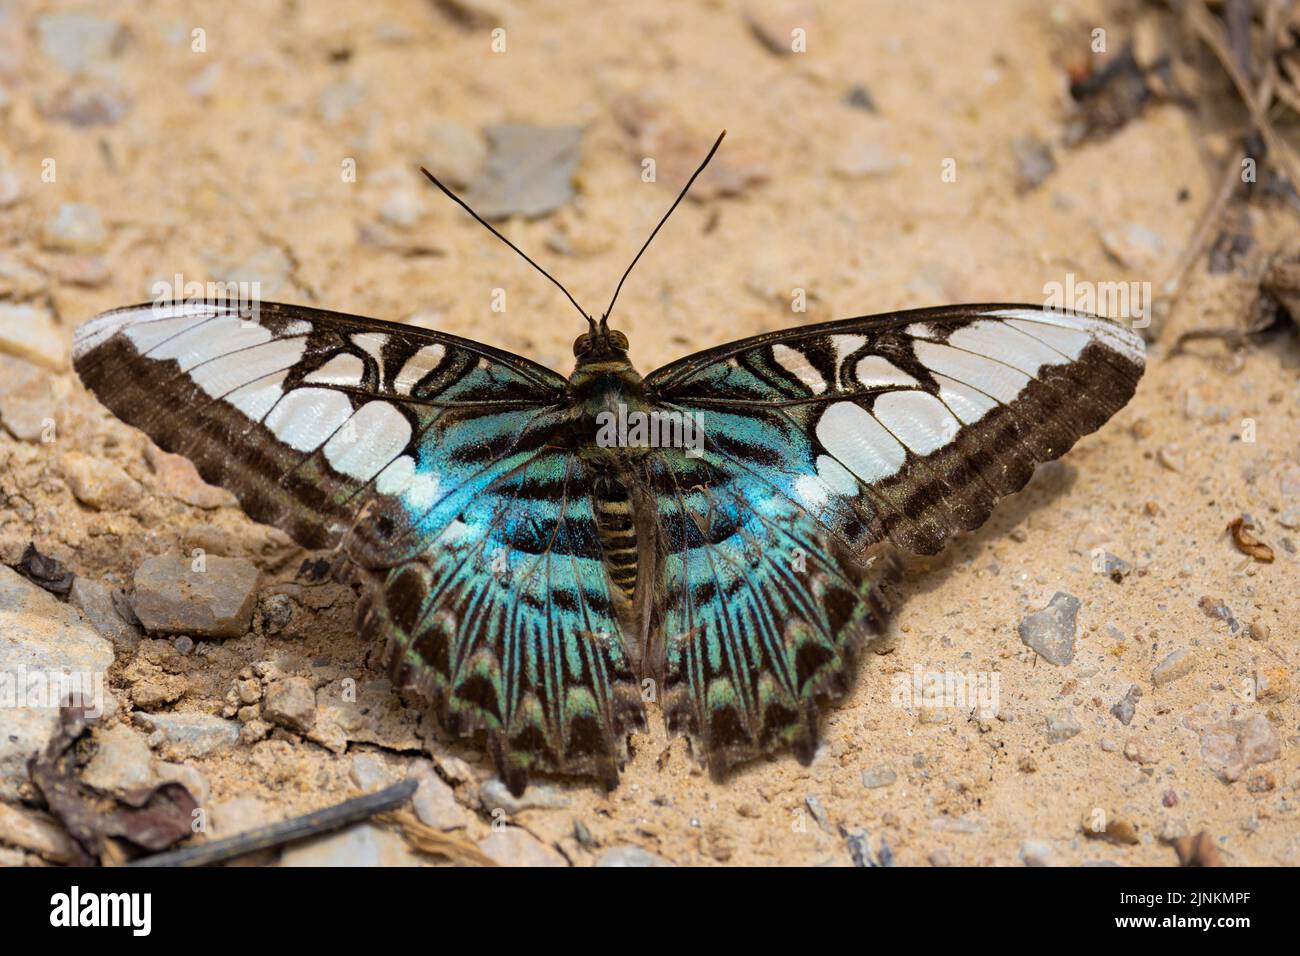 Parthenos sylvia butterfly gathering water on the wet soil. Stock Photo